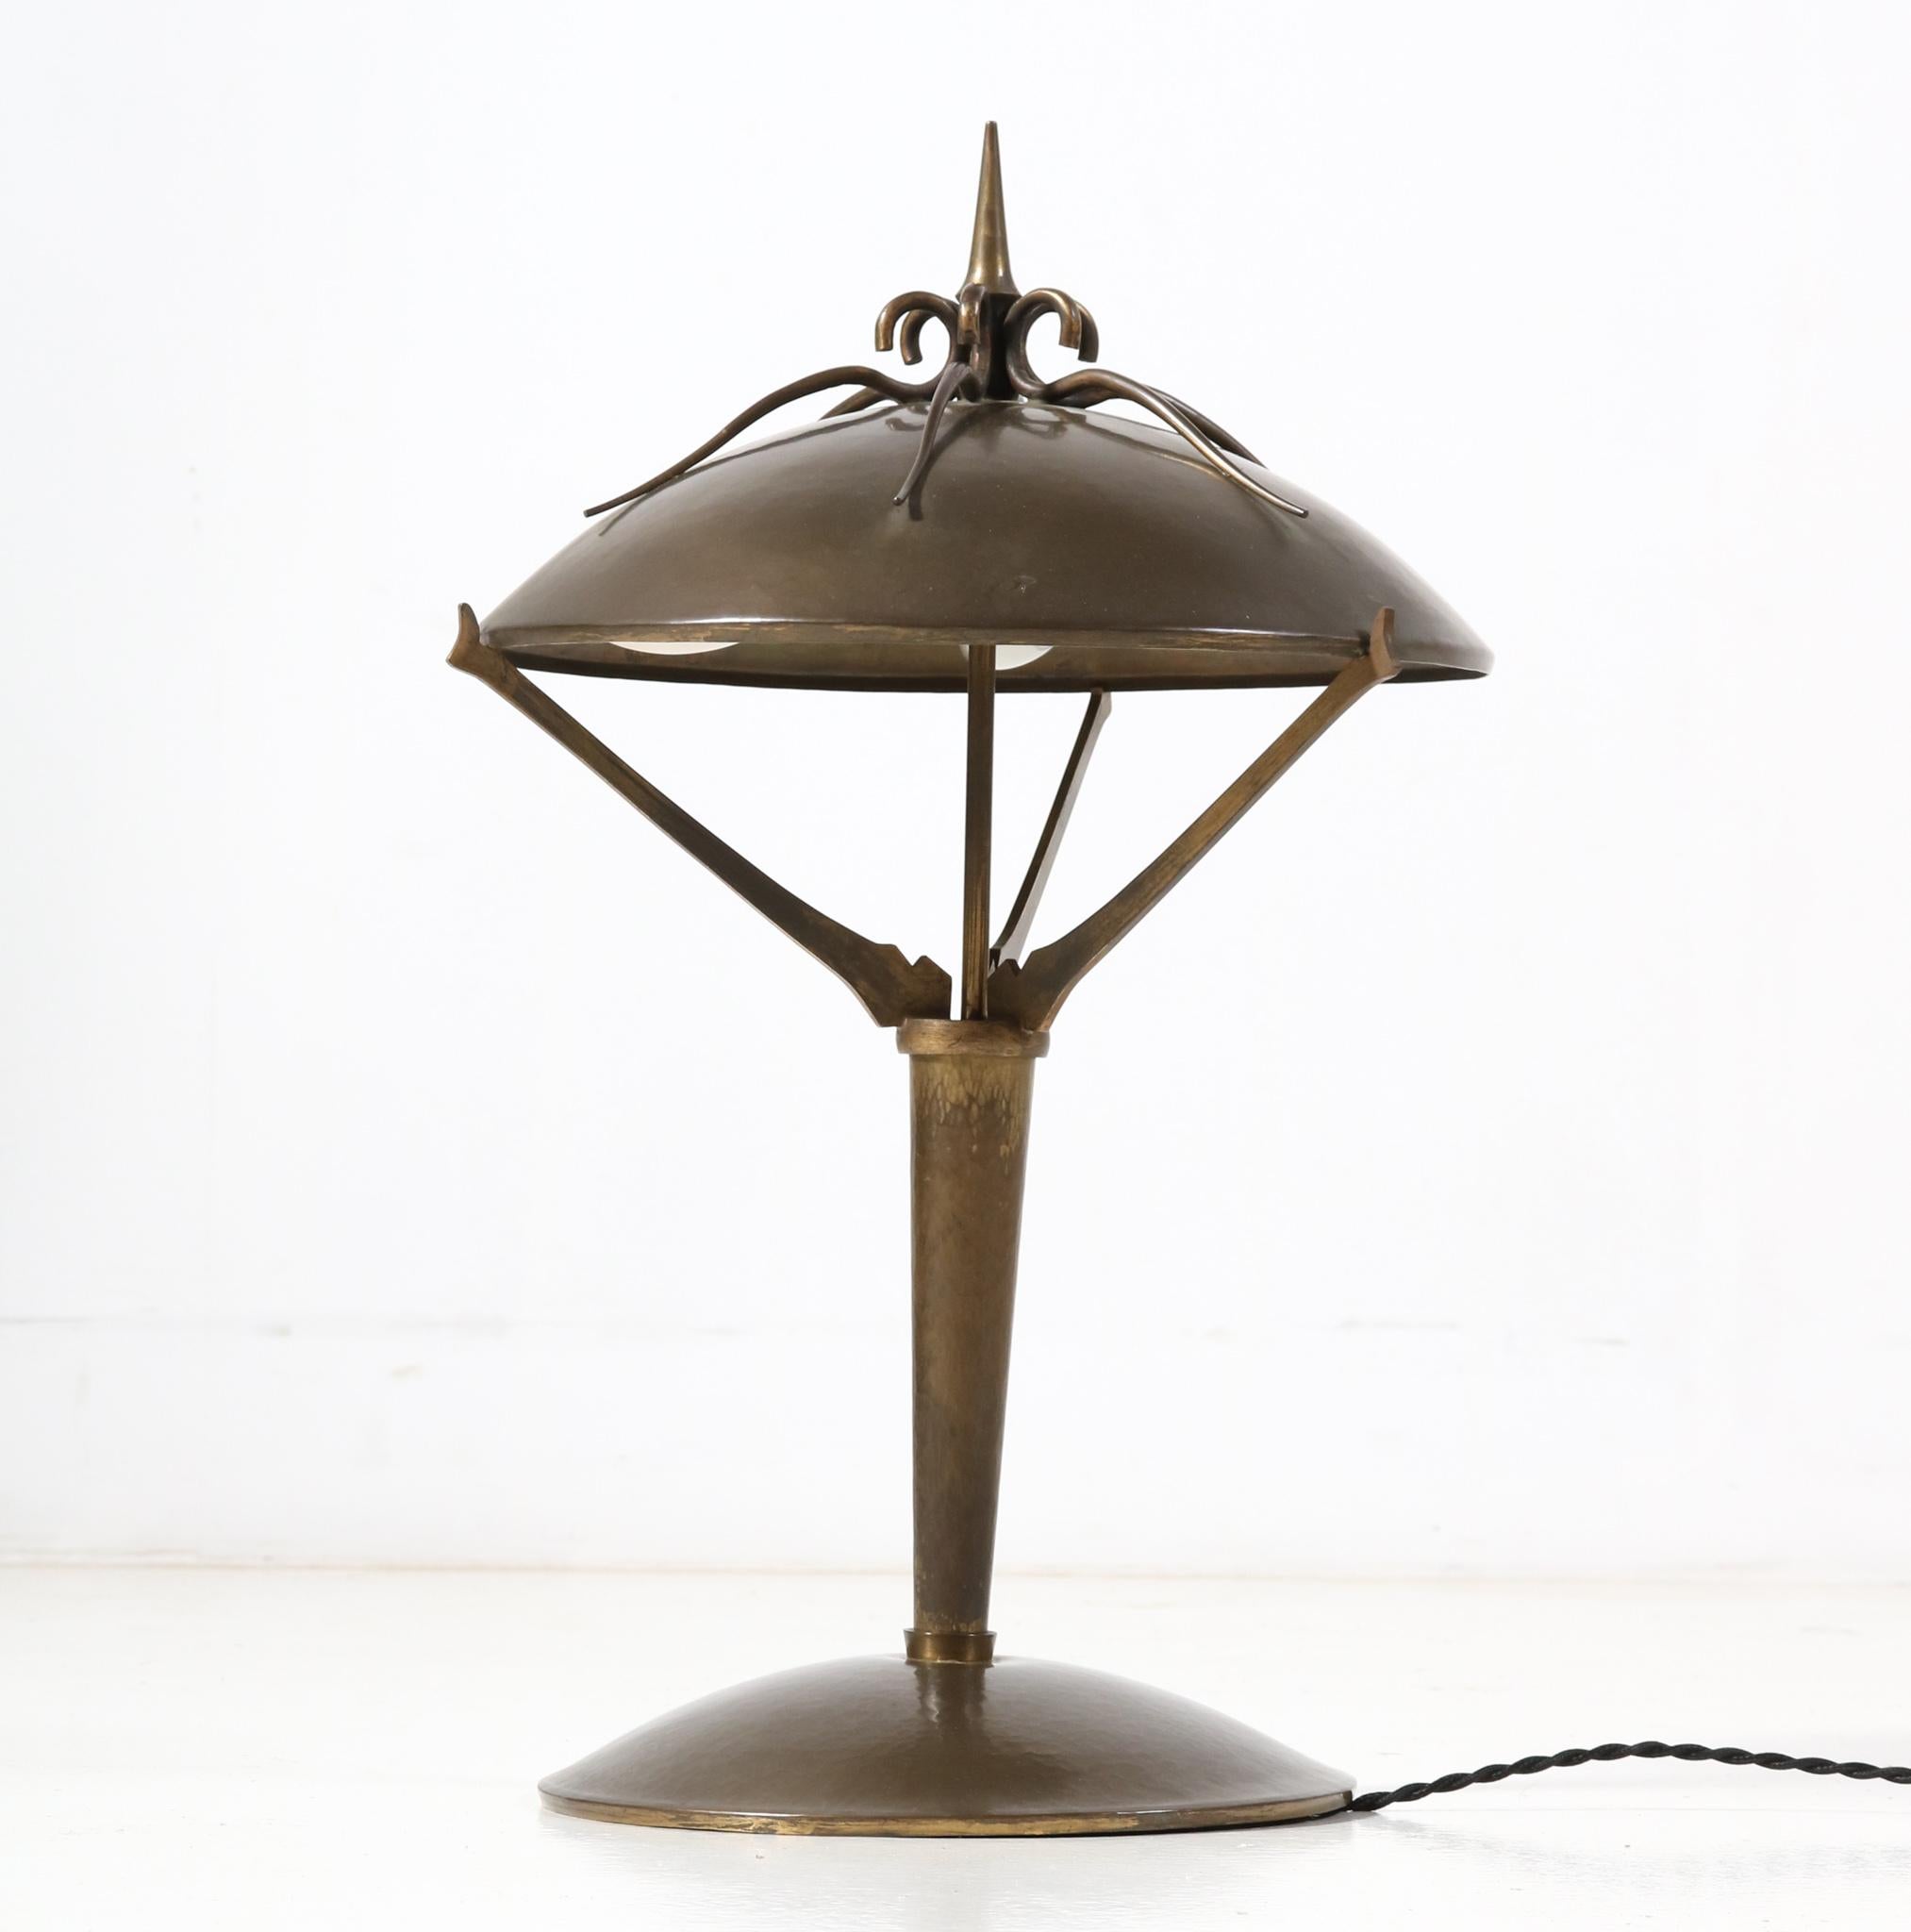 Magnificent and rare Art Deco Amsterdamse School table lamp or desk lamp.
Design in the style of the Gebroeders Reens Amsterdam.
Striking Dutch design from the 1930s.
Patinated brass frame with original patinated brass shade.
Rewired with three